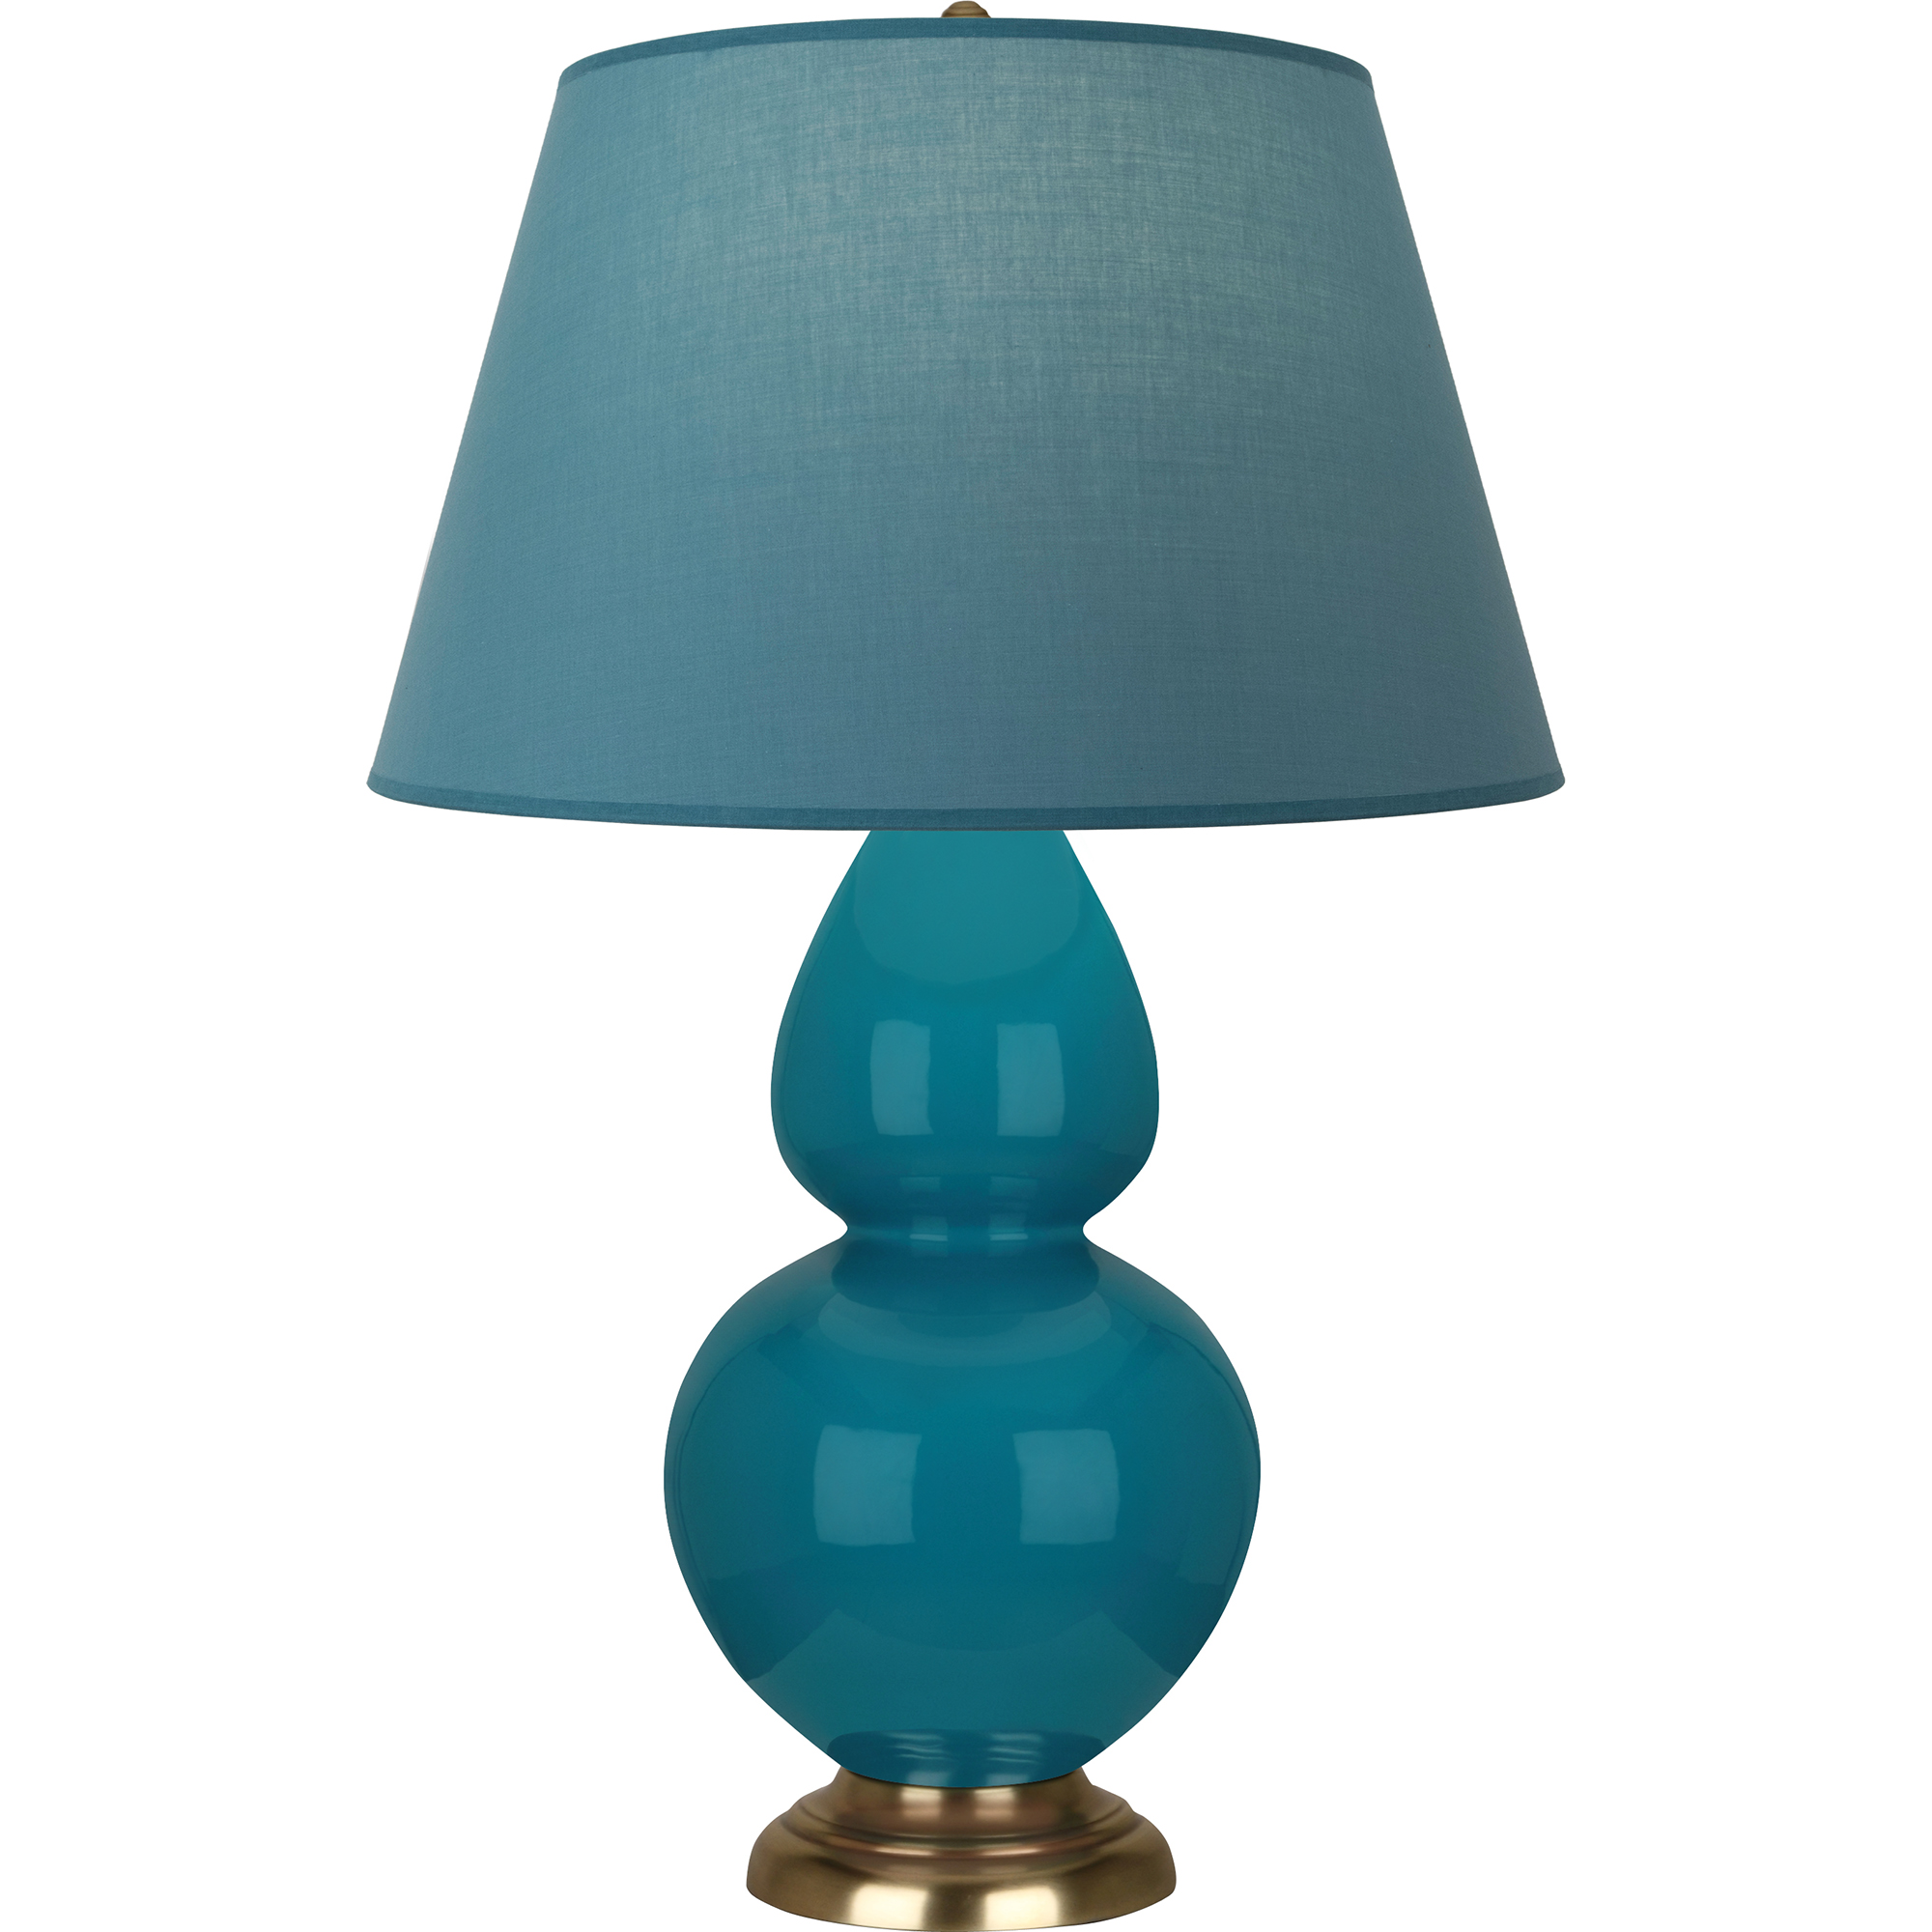 Double Gourd Table Lamp Style #1751B